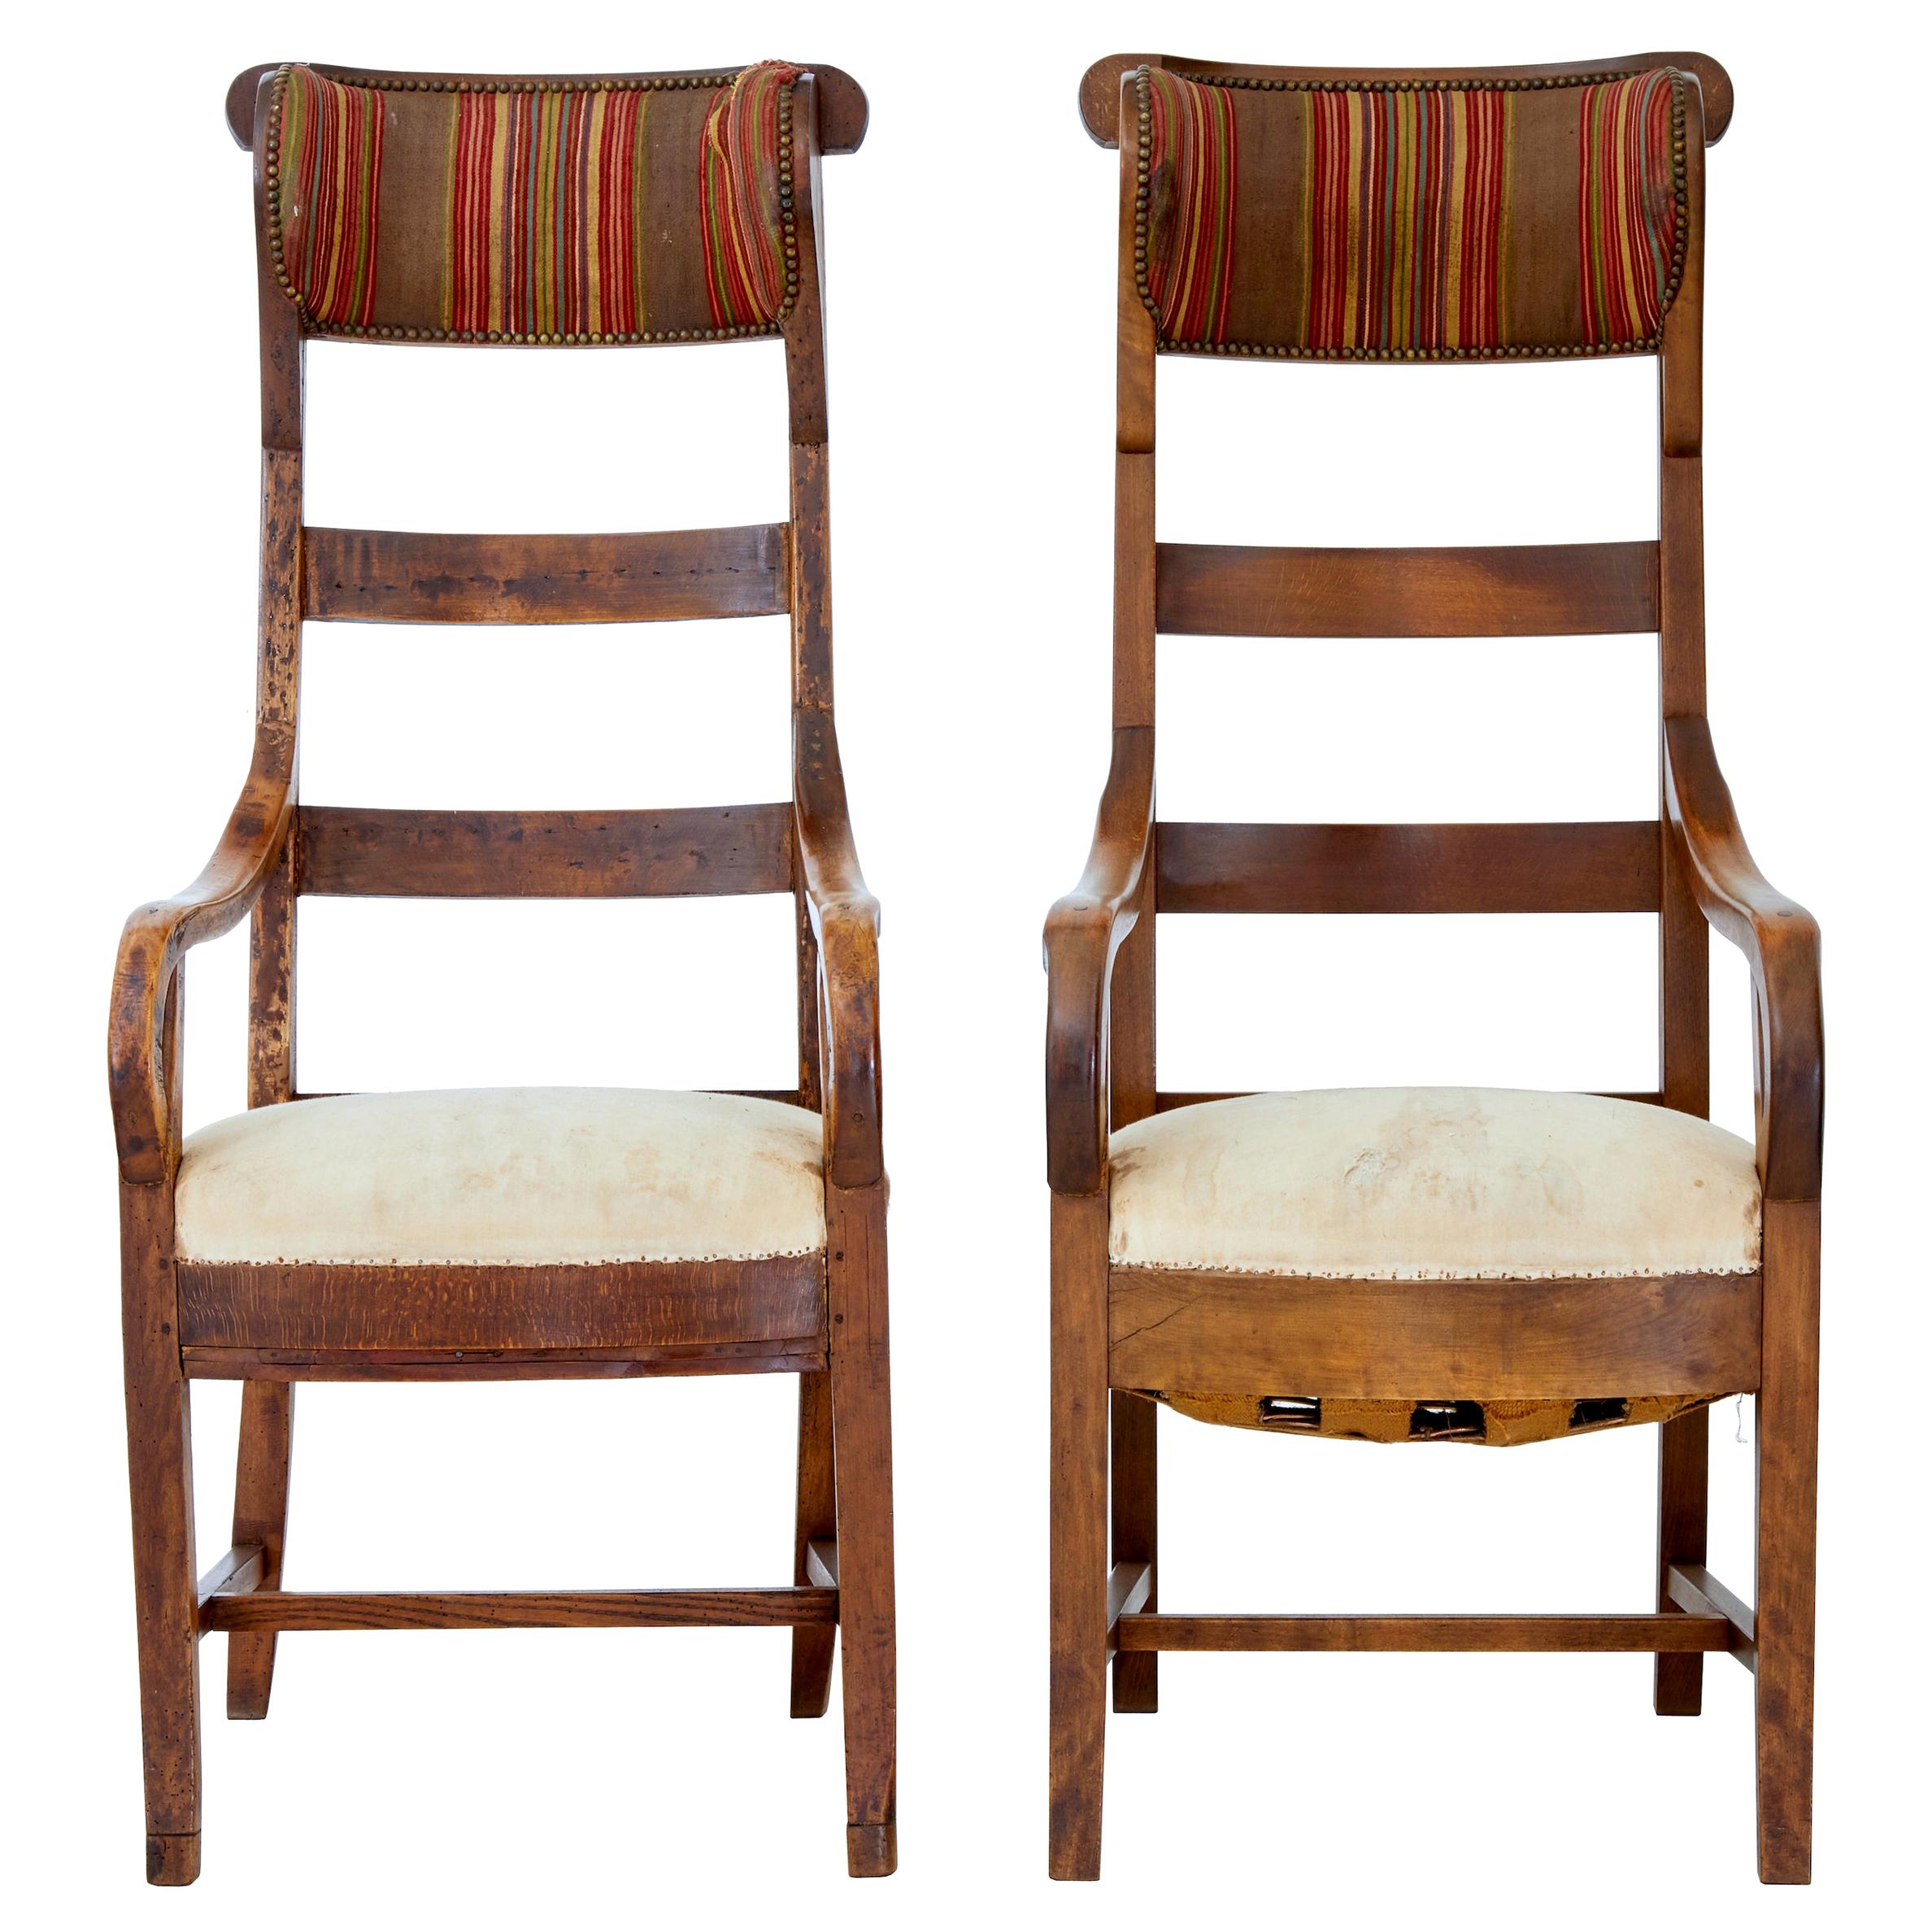 Unusual Pair of 19th Century Fruitwood High Back Armchairs